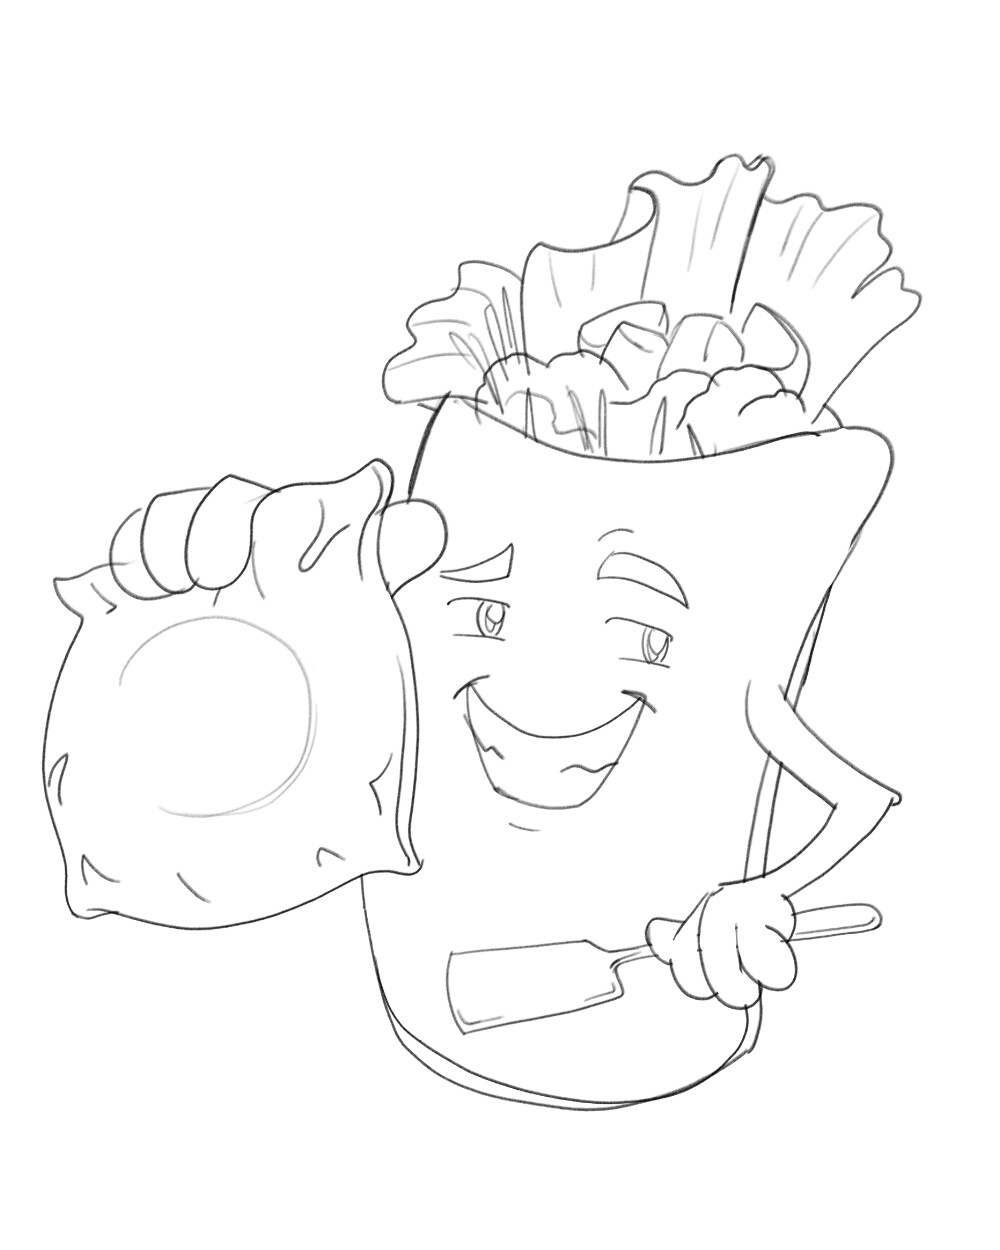 Sketch for burrito character art for company logo, done in Affinity Designer.